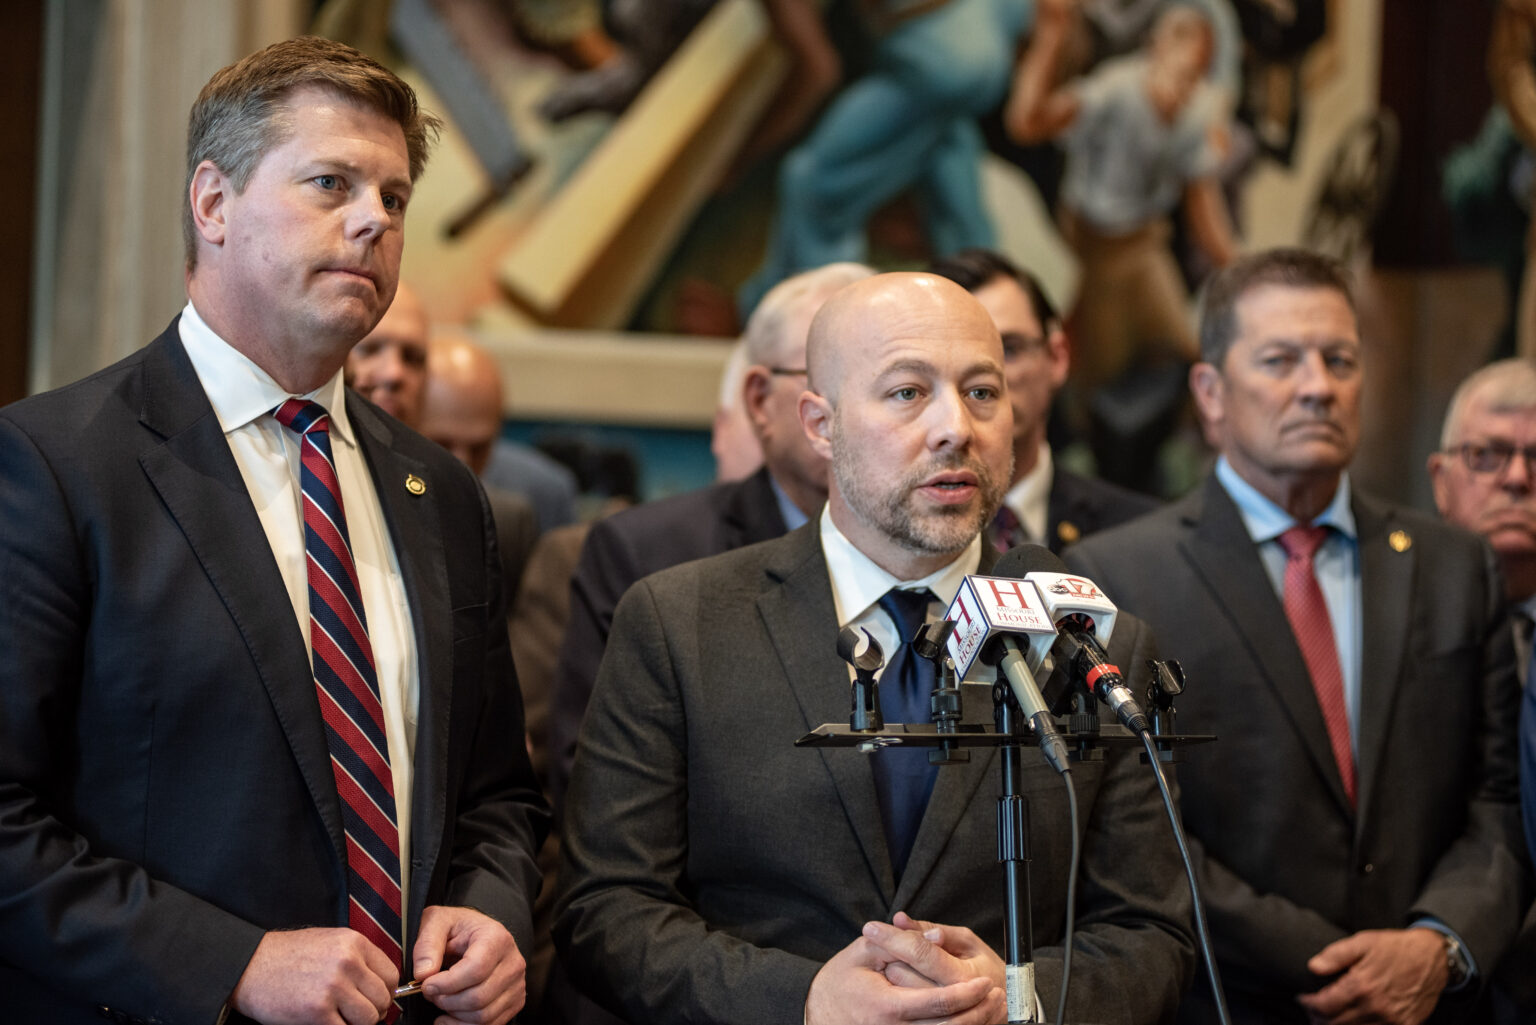 Speaker of the House Dean Plocher, R-Des Peres, and House Budget Chair Cody Smith, R-Carthage, speak to the press after passing the Fiscal Year 2025 operating budget (Annelise Hanshaw/Missouri Independent).